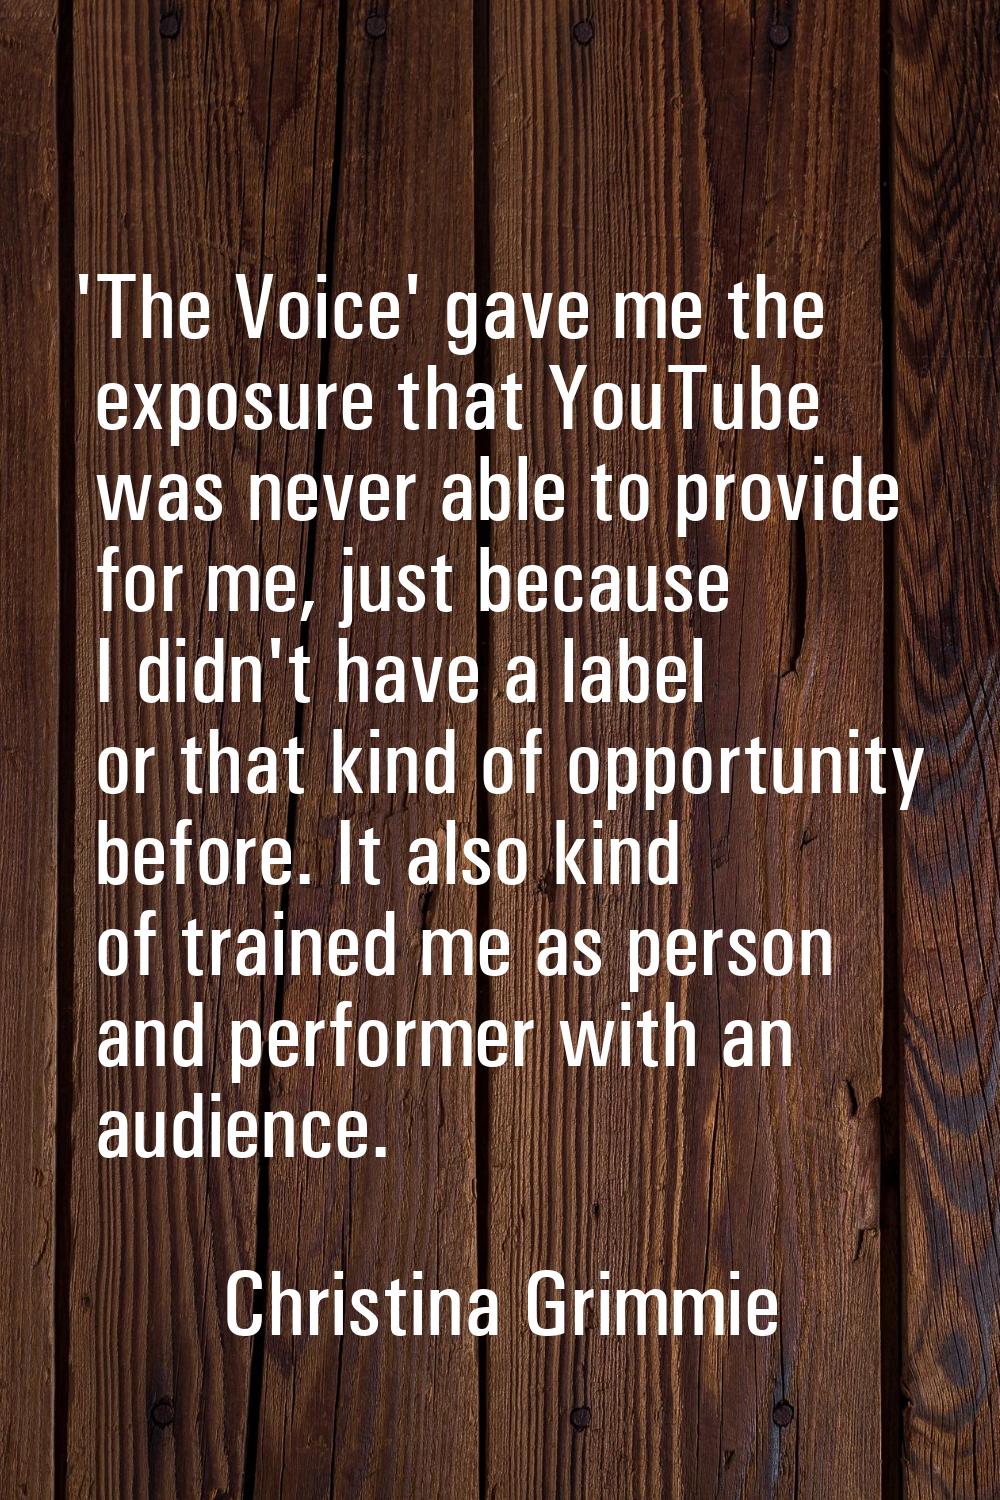 'The Voice' gave me the exposure that YouTube was never able to provide for me, just because I didn